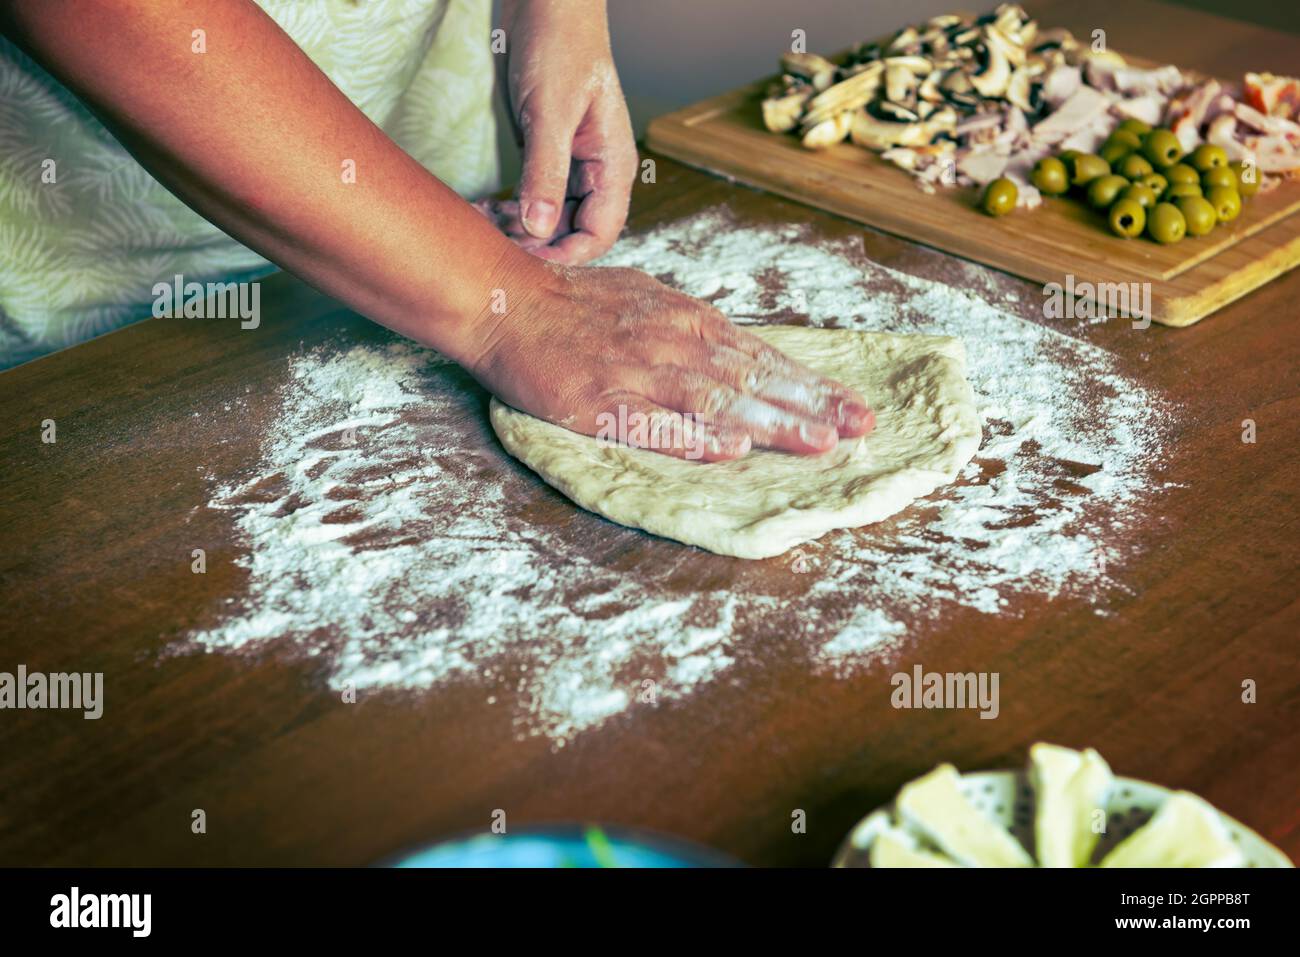 Preparing the Italian pizza. Kneading yeast dough pizza with mushrooms, olives and ham. Stock Photo